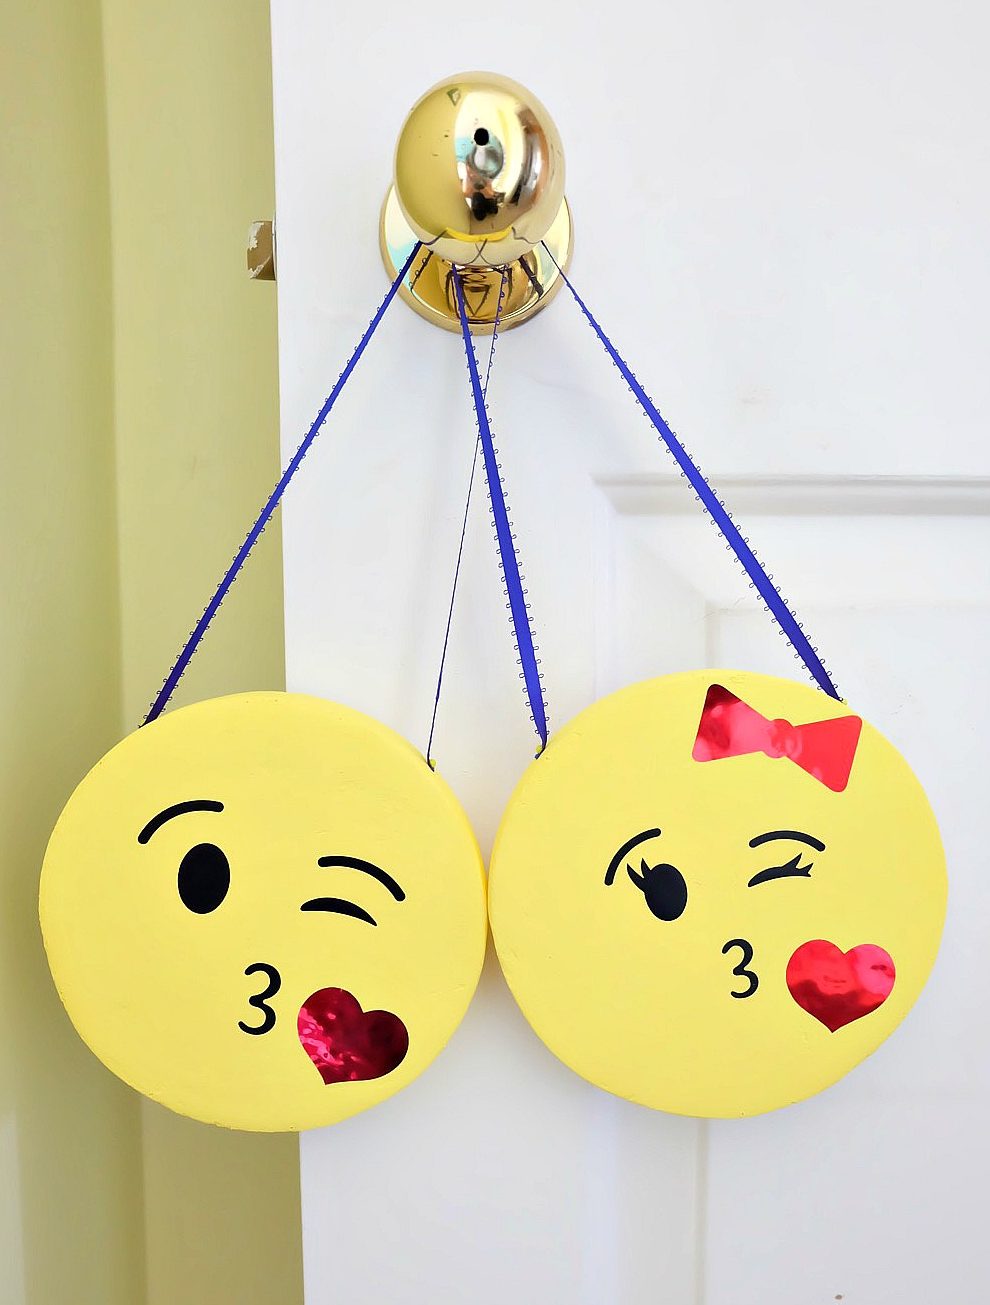 The perfect DIY project to complete an emoji themed kids room or an emoji birthday party! These DIY Emoji Door Hangers are easy to make and a fun kids craft. Use your Cricut to cut the his and her kissy face emoji faces and apply them to painted styrofoam disks. #CricutMade #Emoji #DIY #KidsCrafts